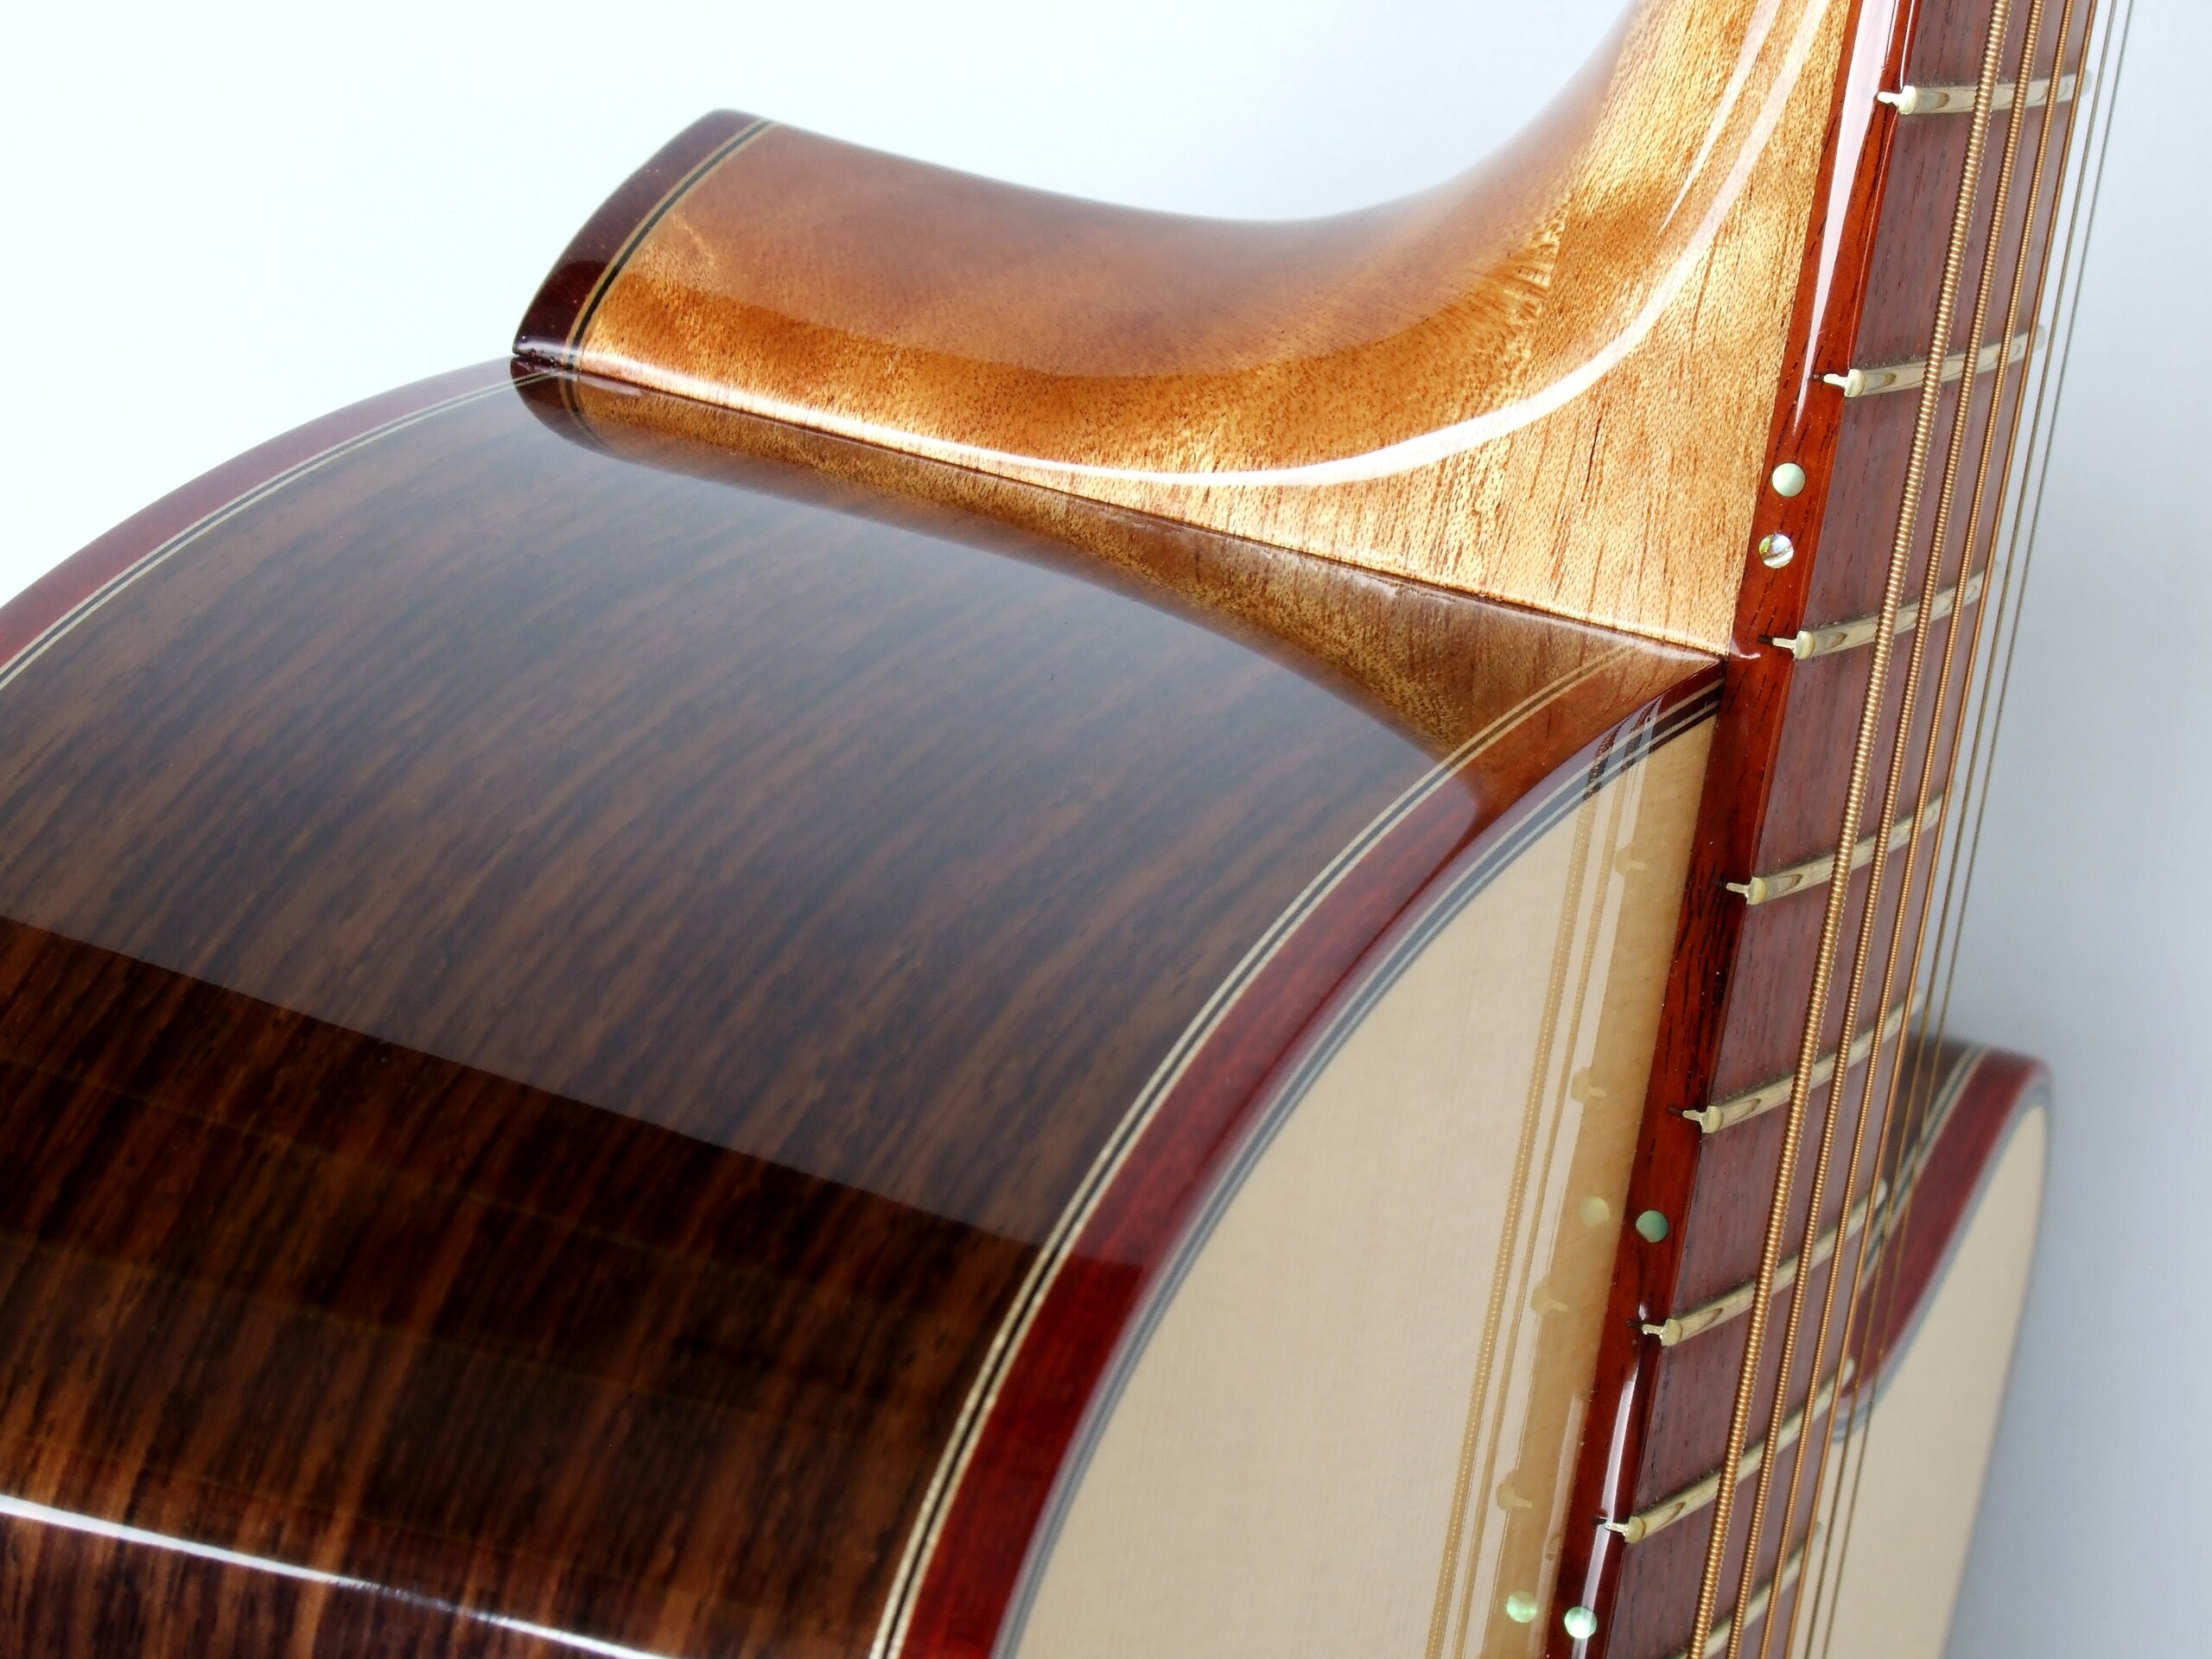 Detail of a neck joint on a steel string guitar